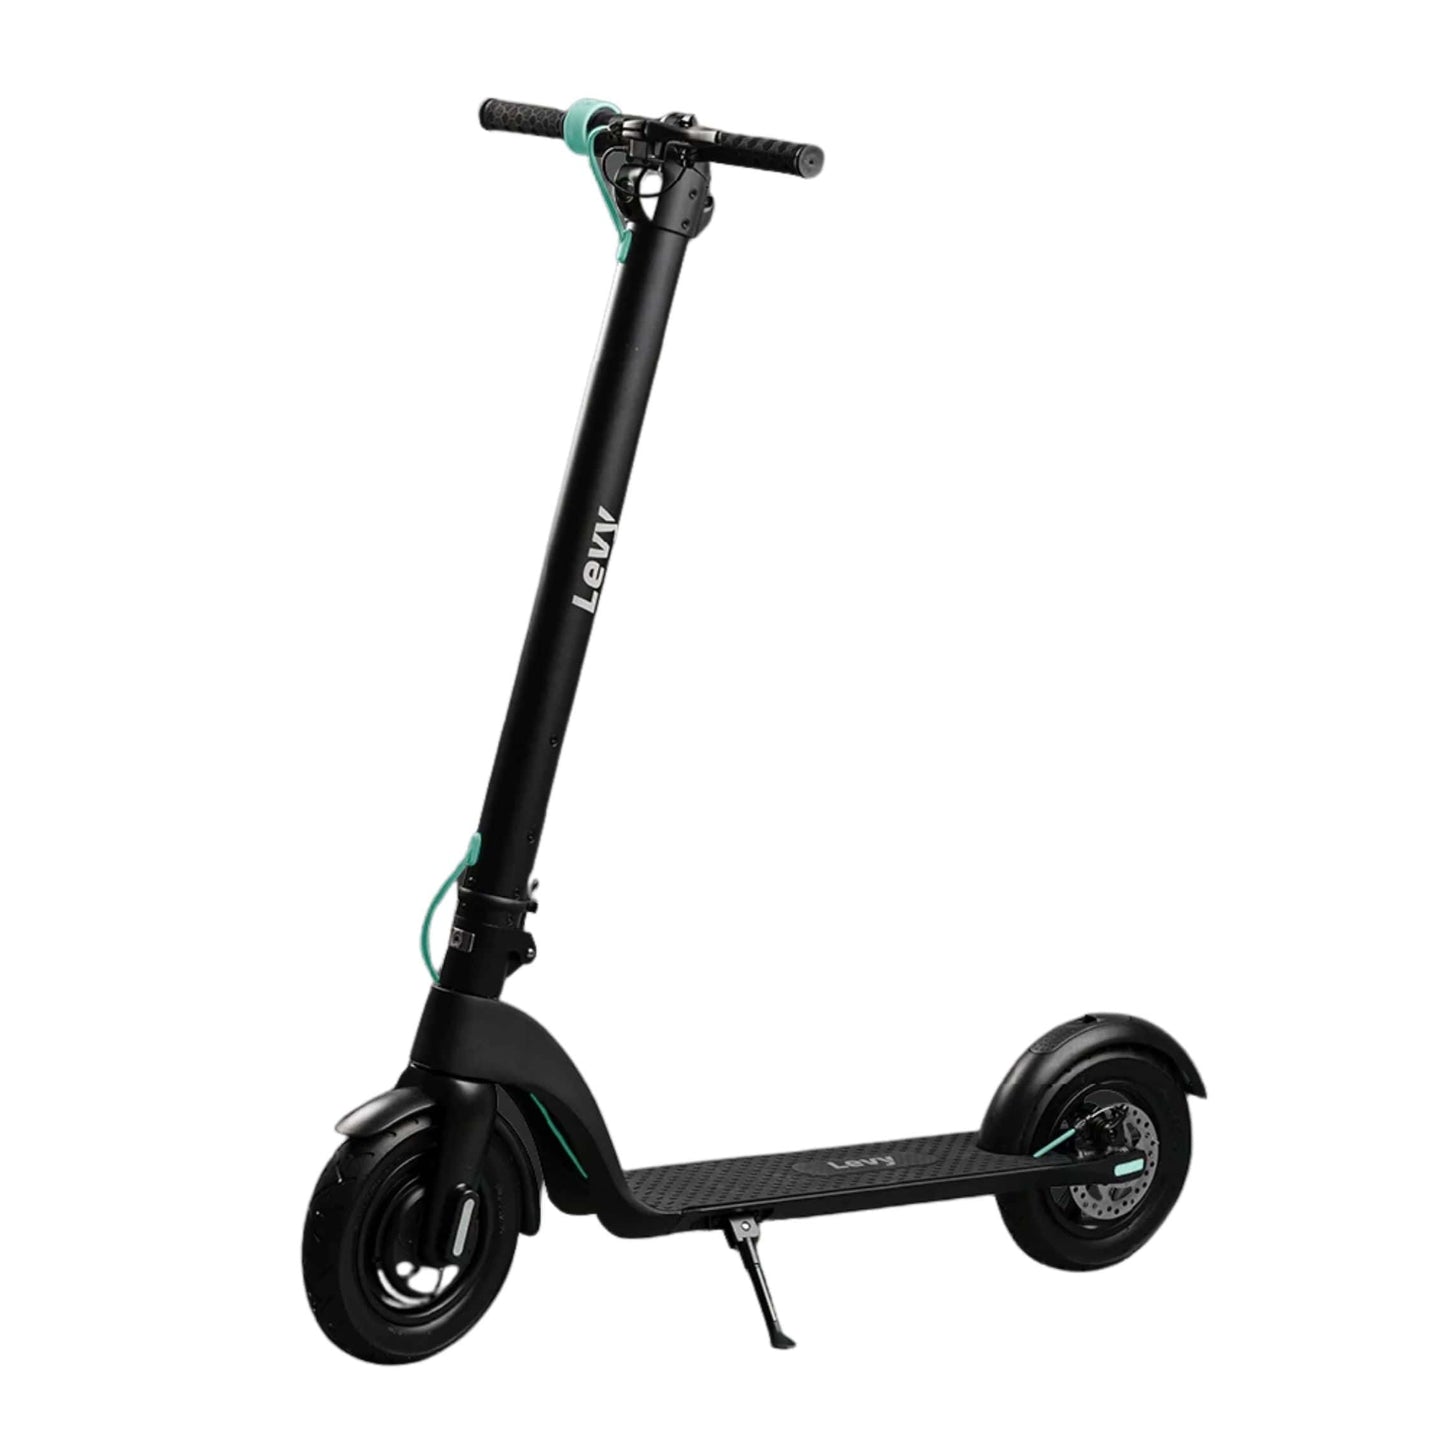 The Levy Electric Scooter